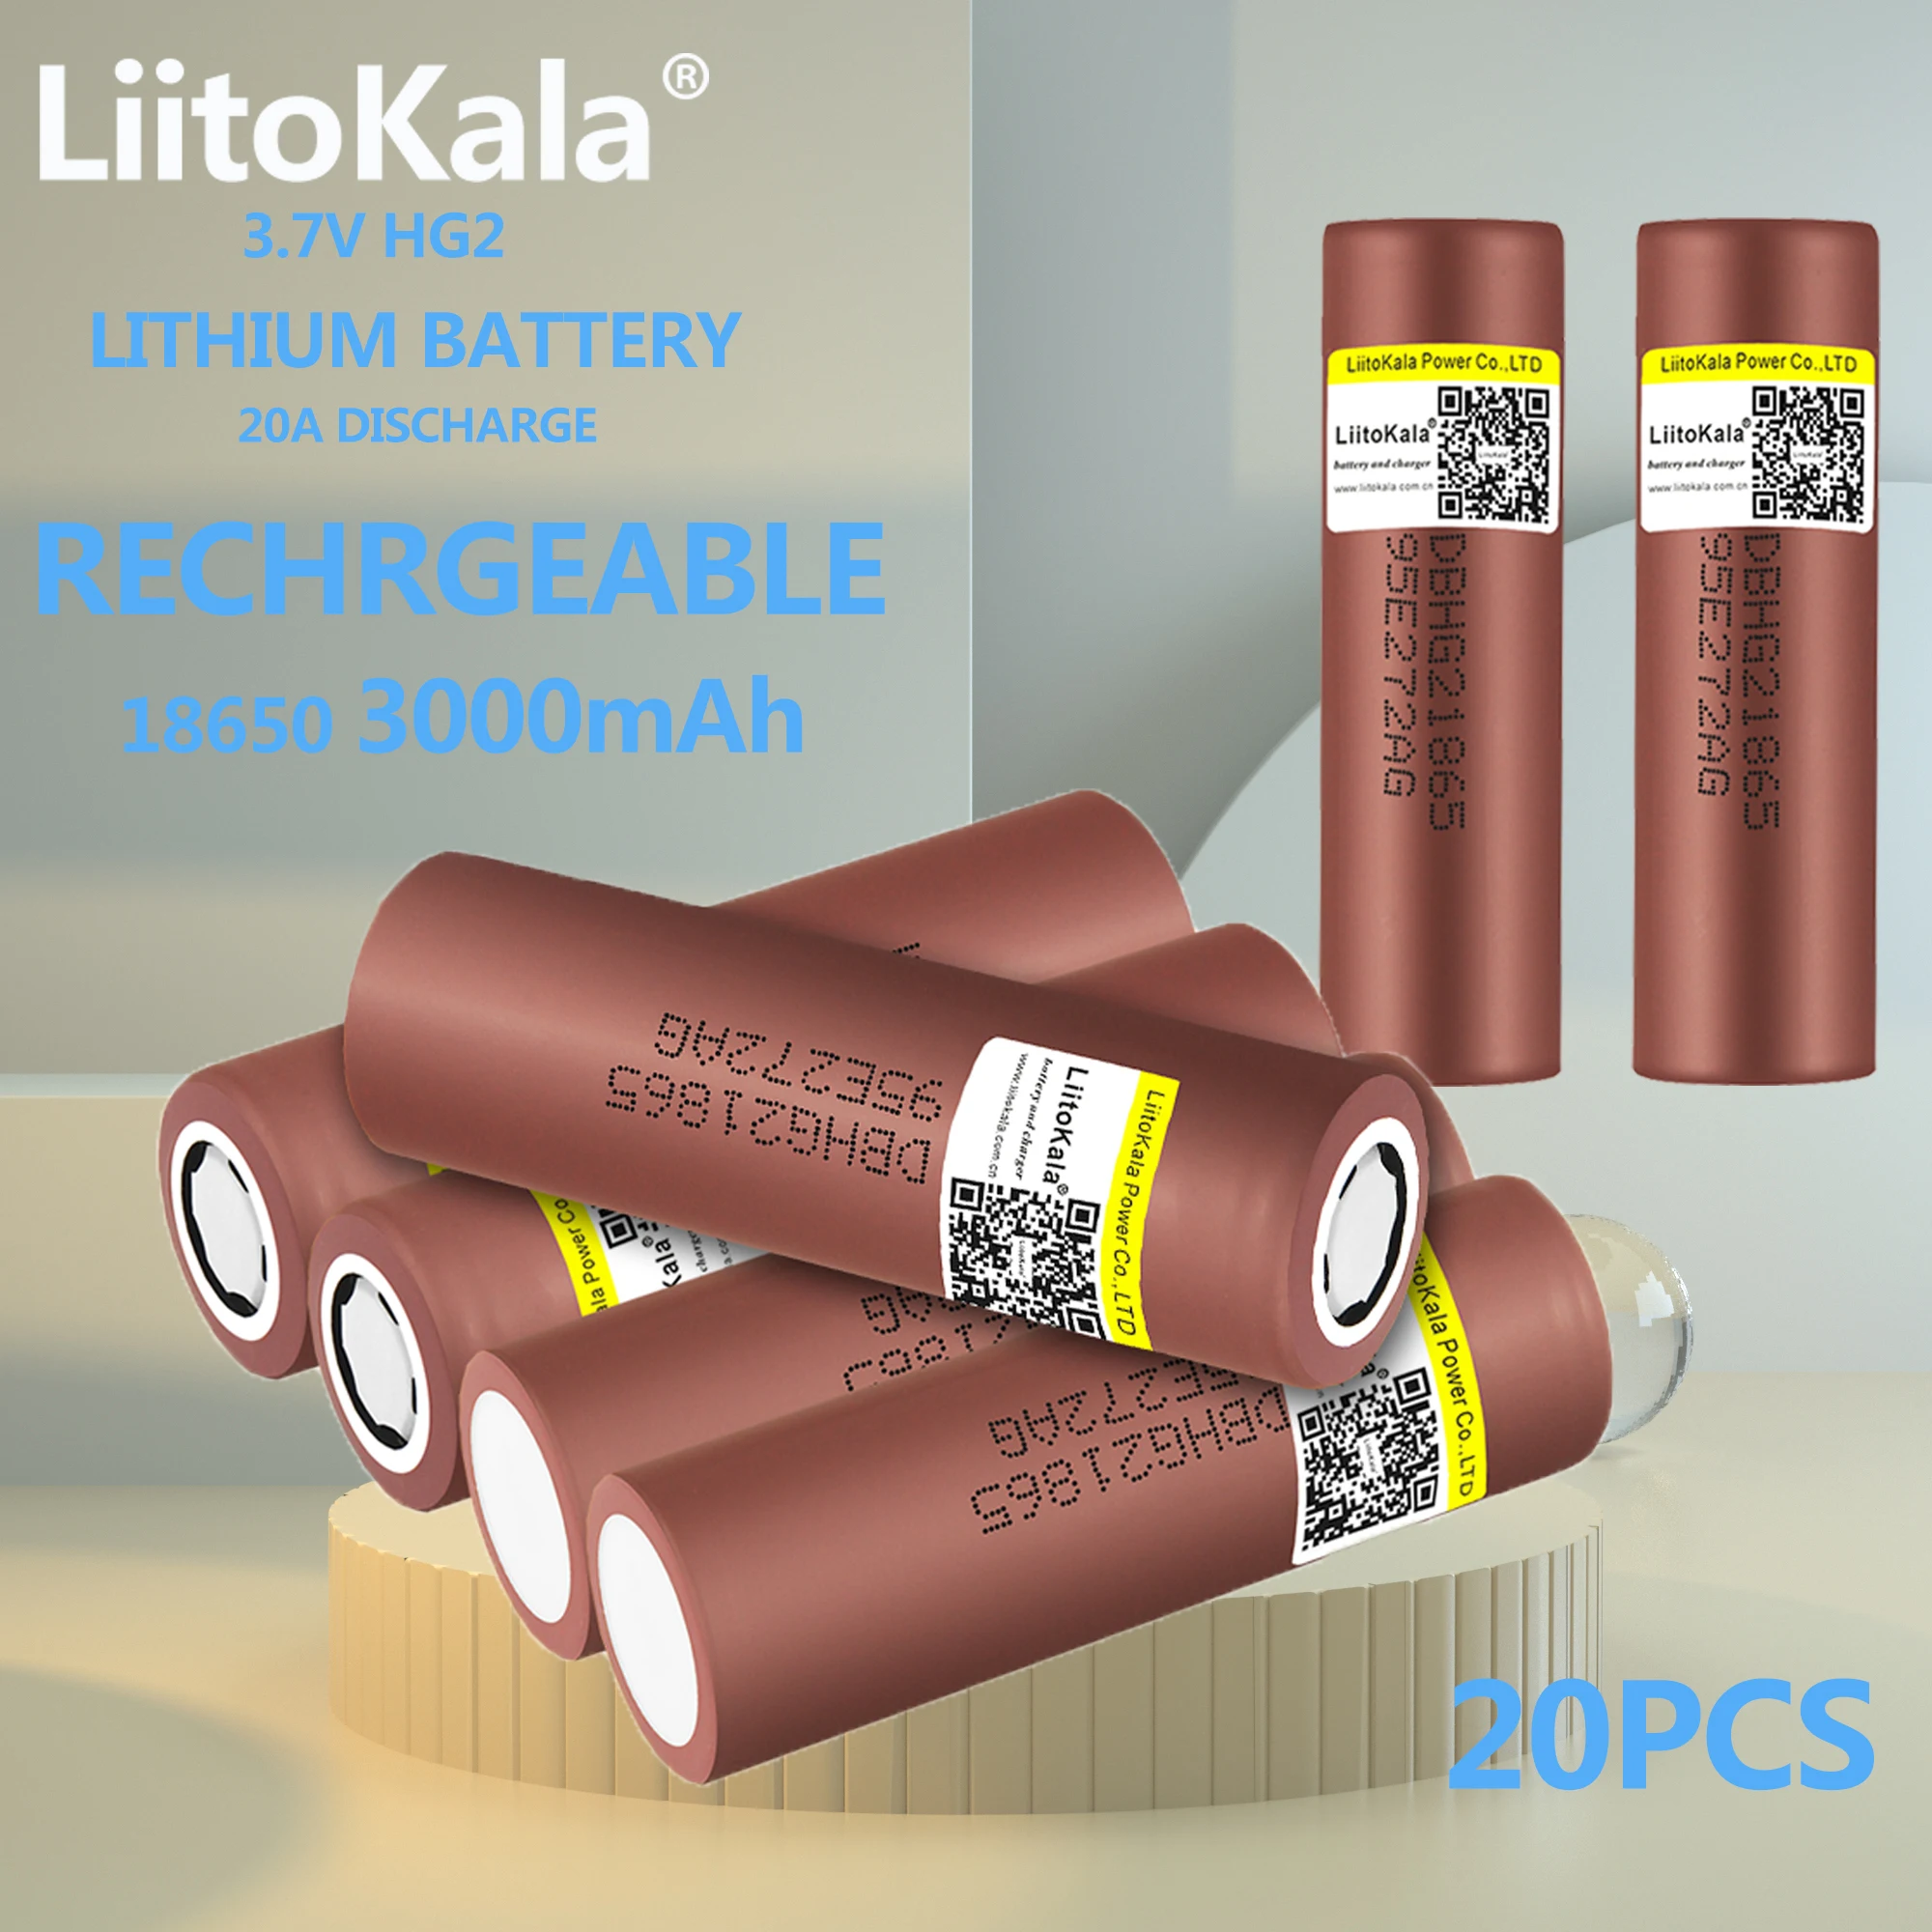 

20PCS Liitokala New Original HG2 18650 3000mAh battery 18650HG2 3.6V discharge 20A dedicated For hg2 Power Rechargeable battery